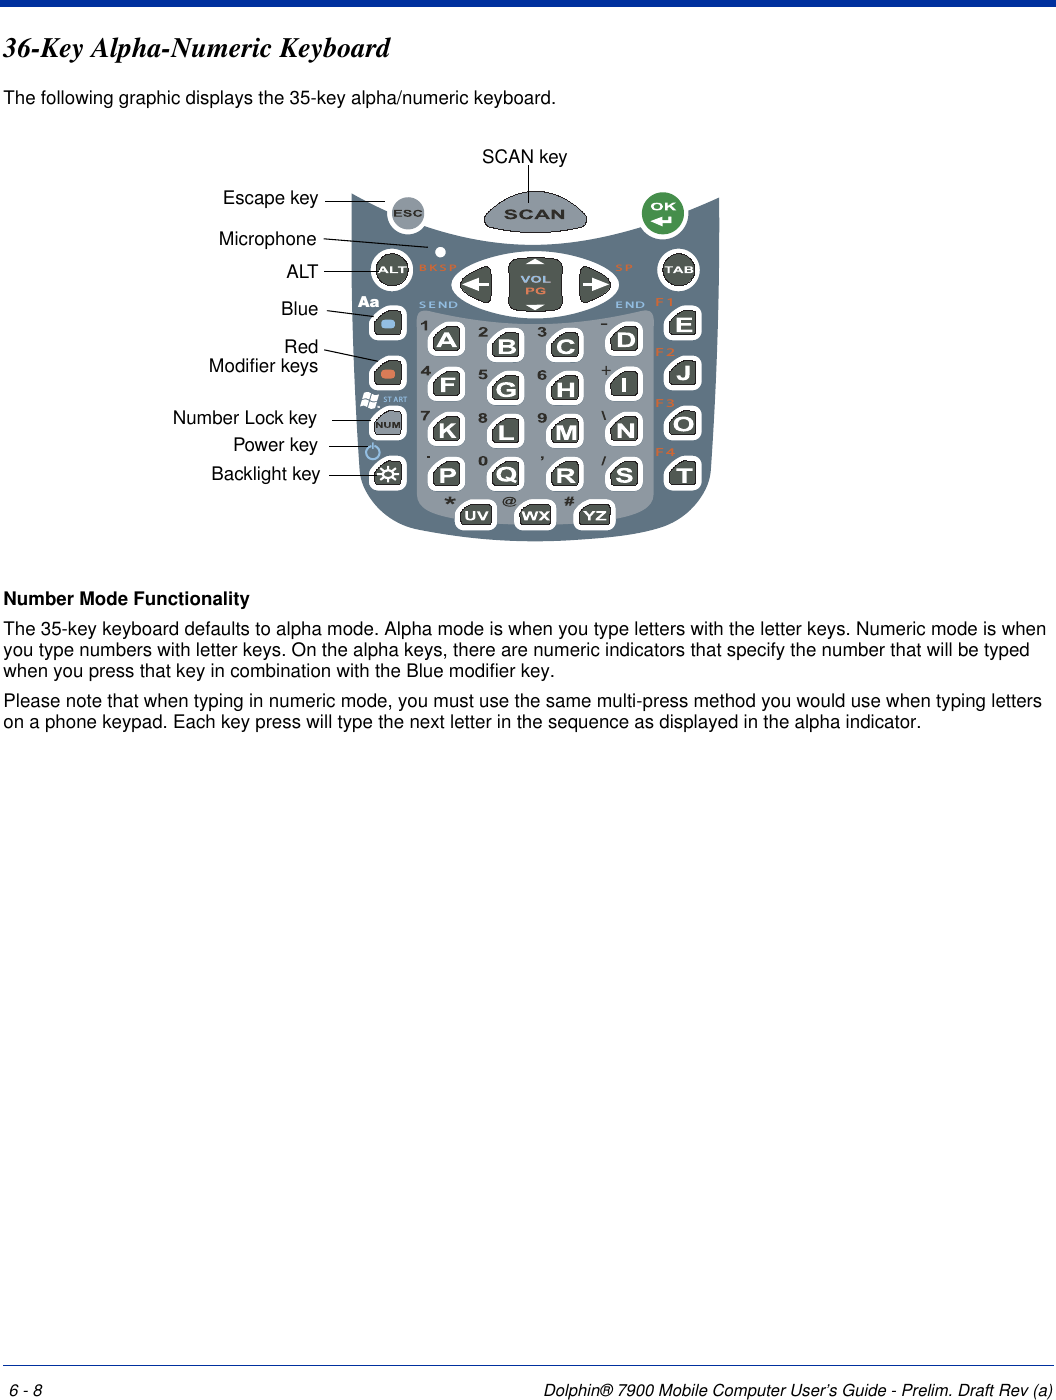 6 - 8 Dolphin® 7900 Mobile Computer User’s Guide - Prelim. Draft Rev (a)36-Key Alpha-Numeric KeyboardThe following graphic displays the 35-key alpha/numeric keyboard.Number Mode FunctionalityThe 35-key keyboard defaults to alpha mode. Alpha mode is when you type letters with the letter keys. Numeric mode is when you type numbers with letter keys. On the alpha keys, there are numeric indicators that specify the number that will be typed when you press that key in combination with the Blue modifier key.Please note that when typing in numeric mode, you must use the same multi-press method you would use when typing letters on a phone keypad. Each key press will type the next letter in the sequence as displayed in the alpha indicator.ST ARTAa+-BKSP SPSEND ENDF1F2F3F4SCAN keyNumber Lock keyALTBlueRed Modifier keysEscape keyPower keyMicrophone Backlight key